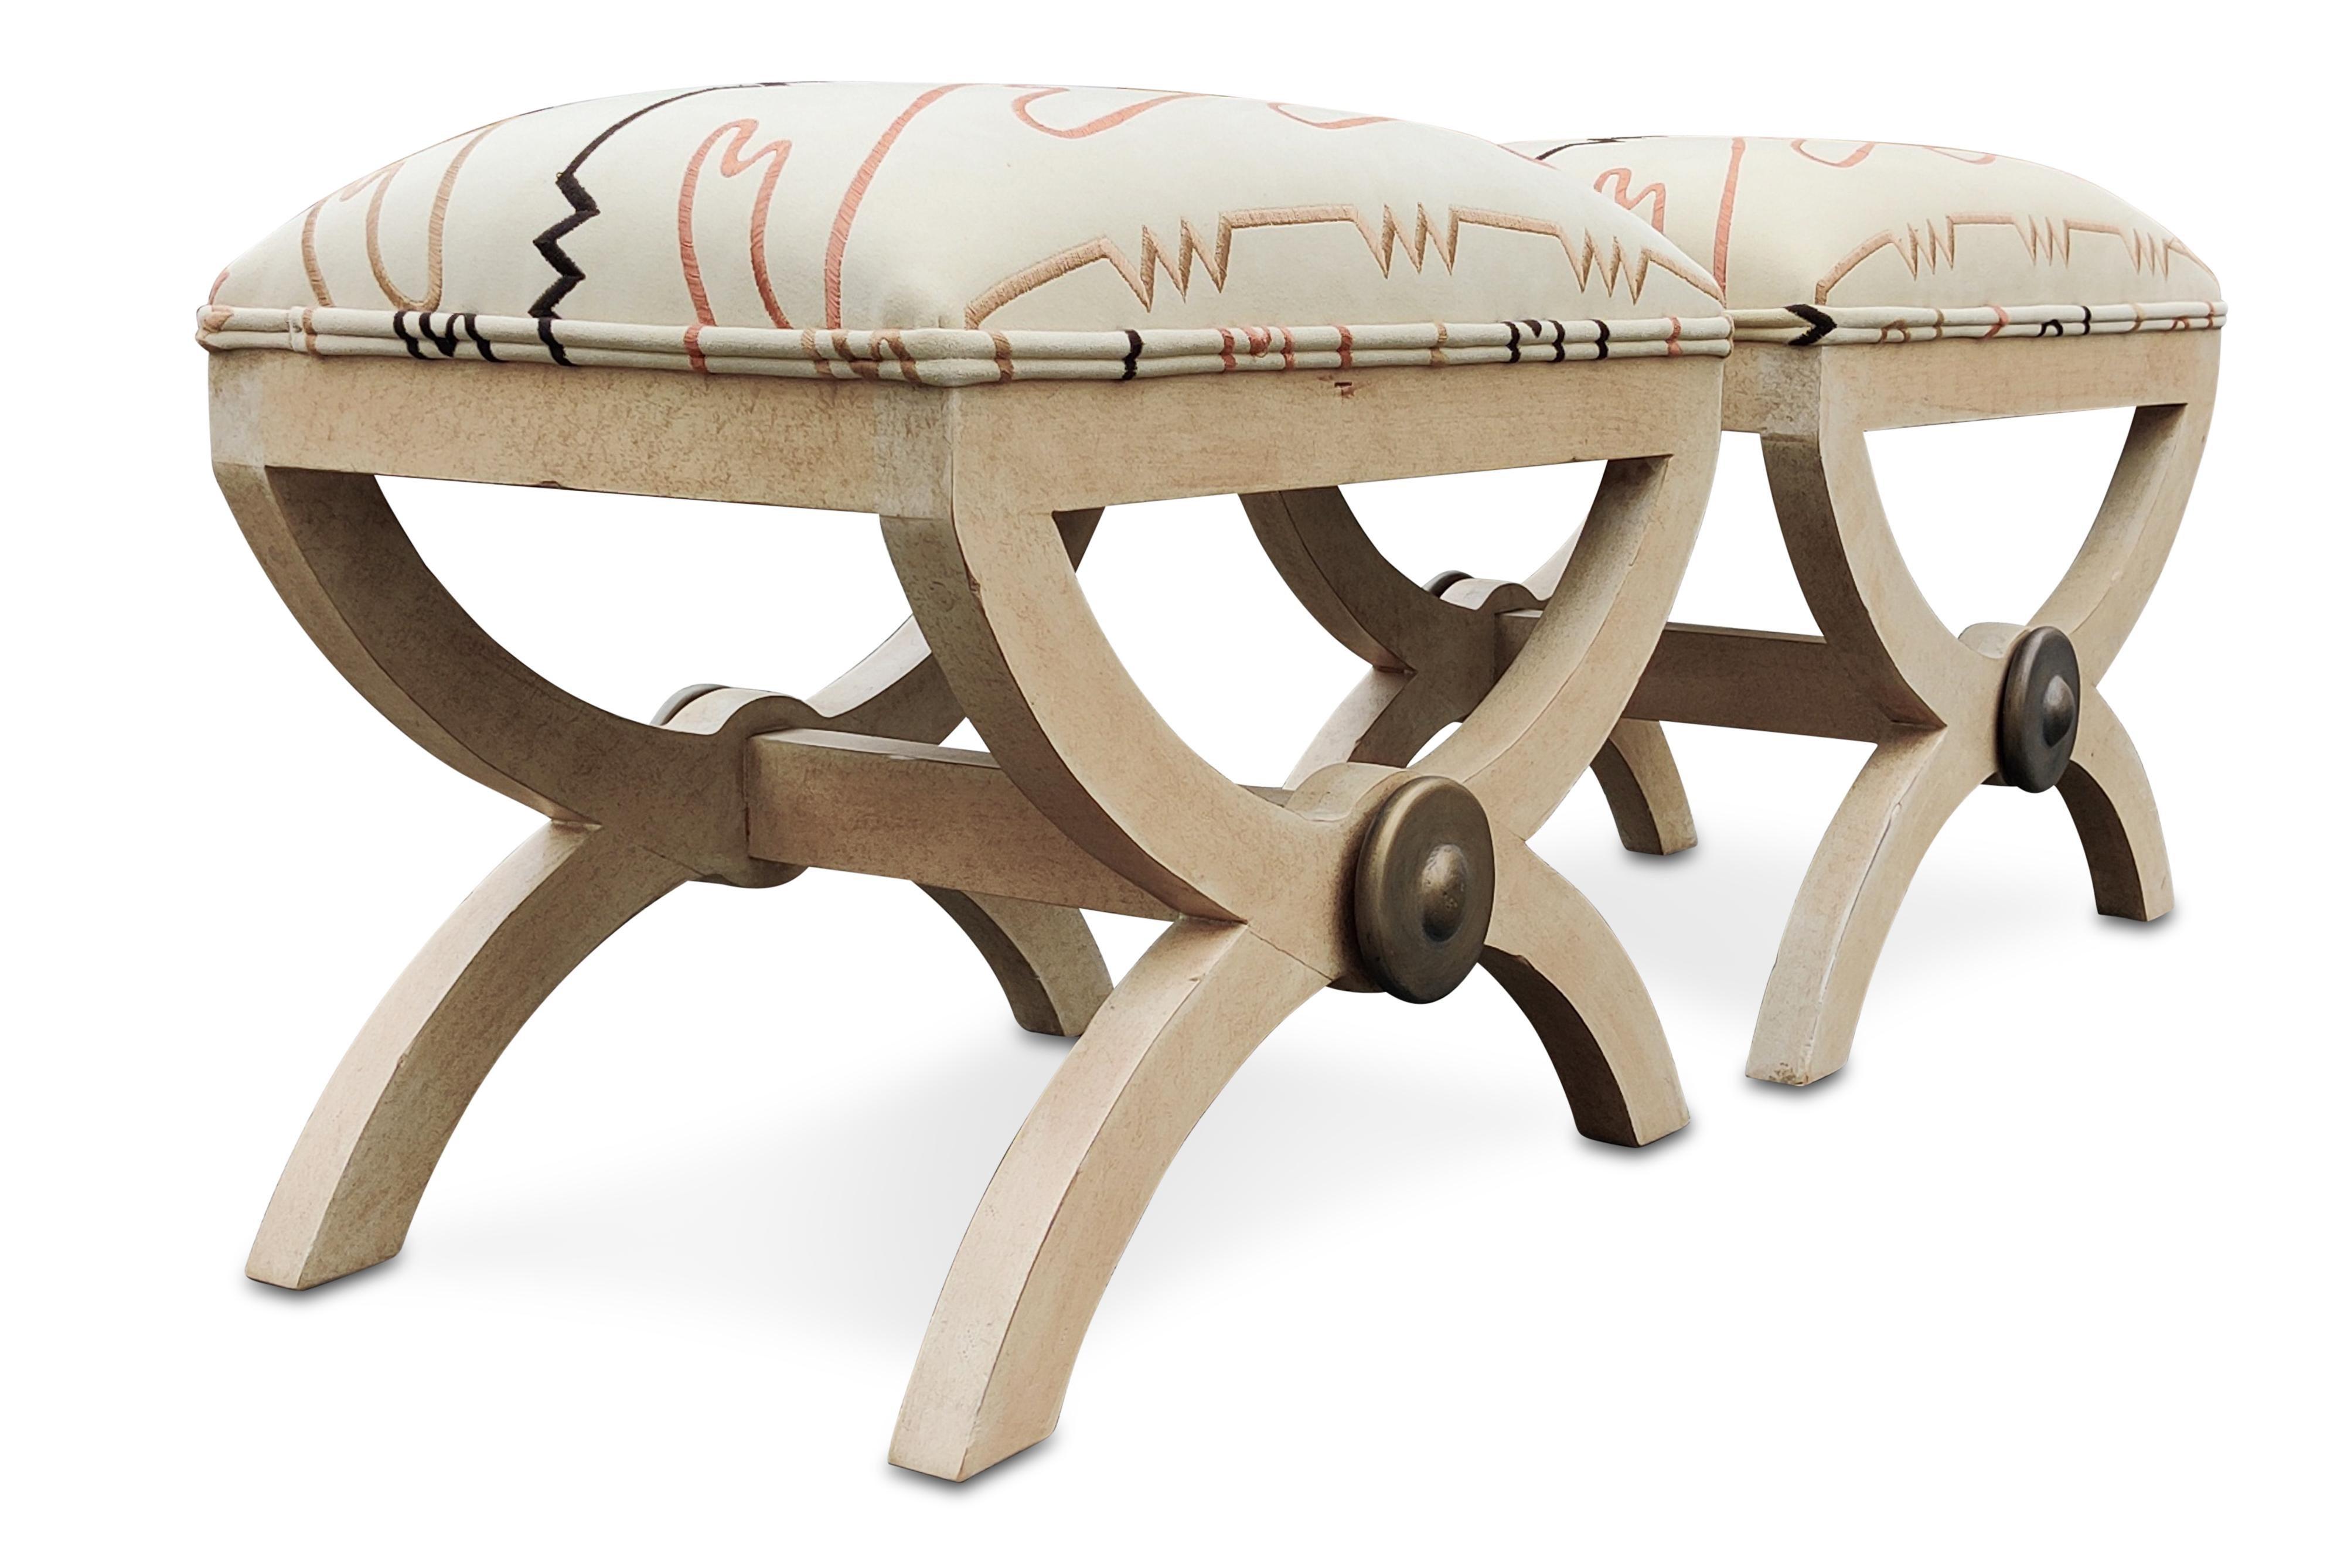 This pair of benches are manufactured by luxury company Kreiss, who commissioned these as a part of their Kreiss Collection, meaning they were designed in-house. They feature a carved and lightly colored wood base composed of two inverted